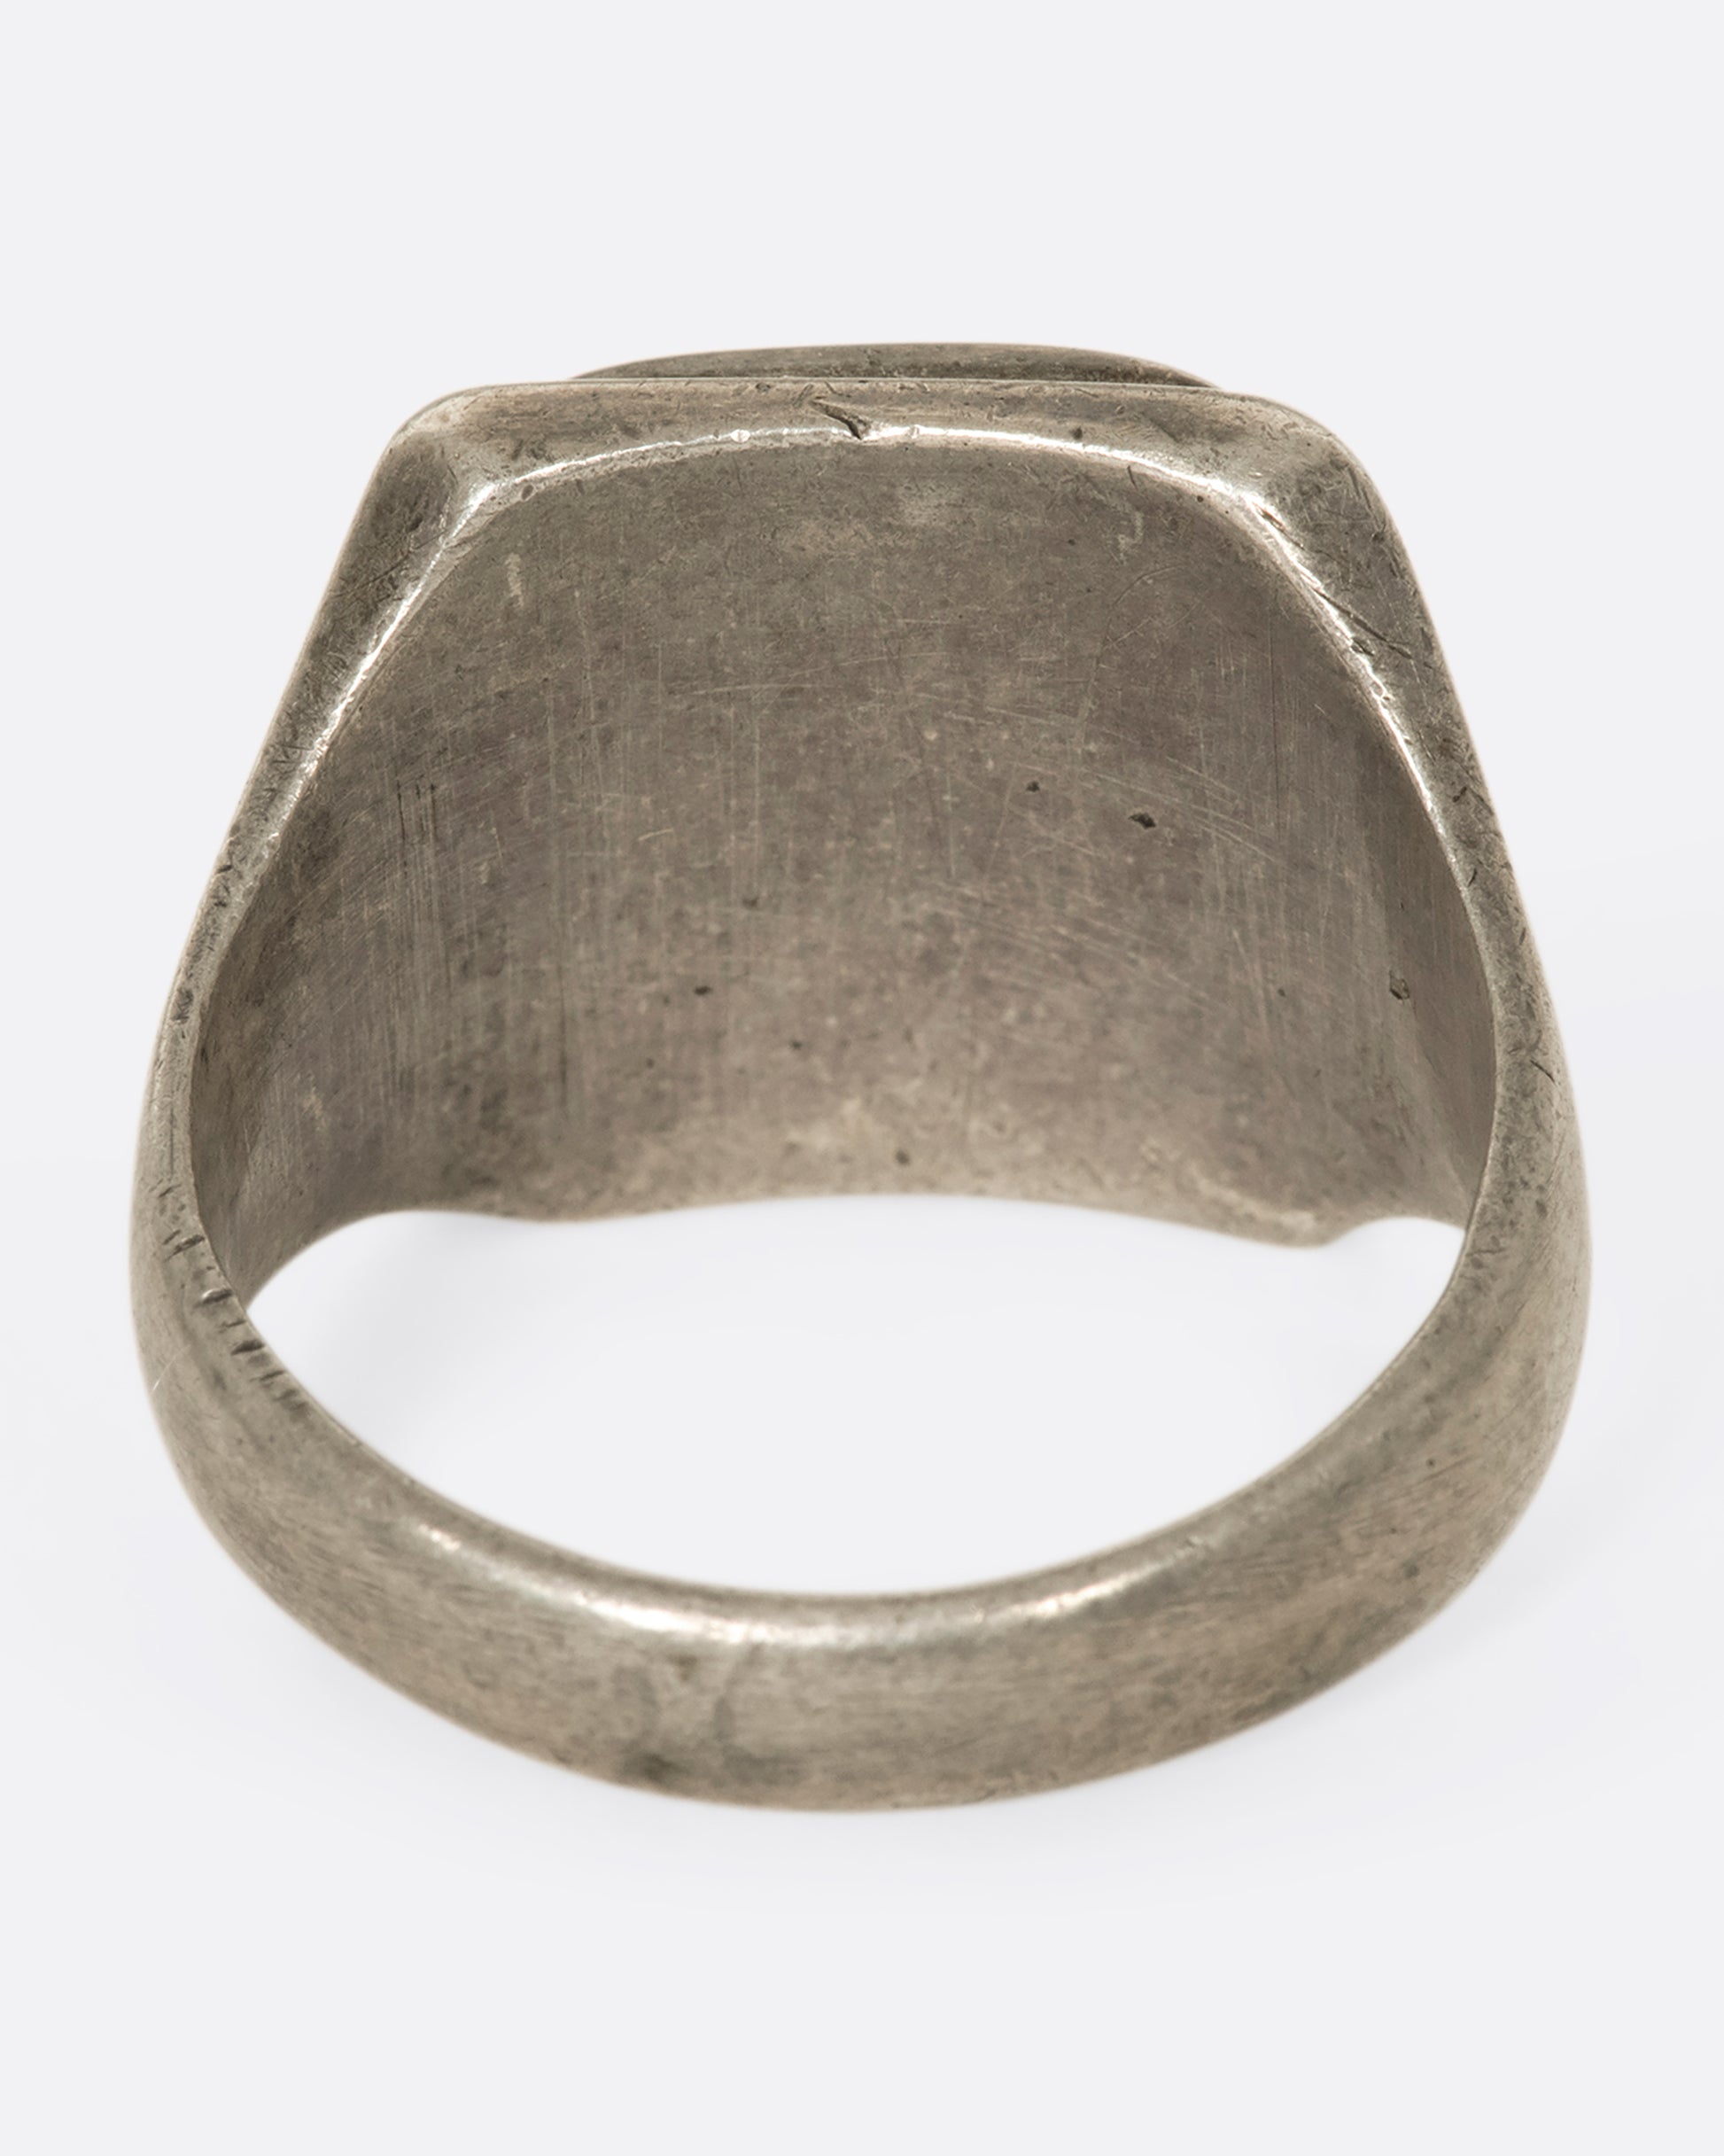 This square-faced 1940s sterling silver signet ring has a copper face with the initials RJ elegantly engraved. Gift accordingly. 